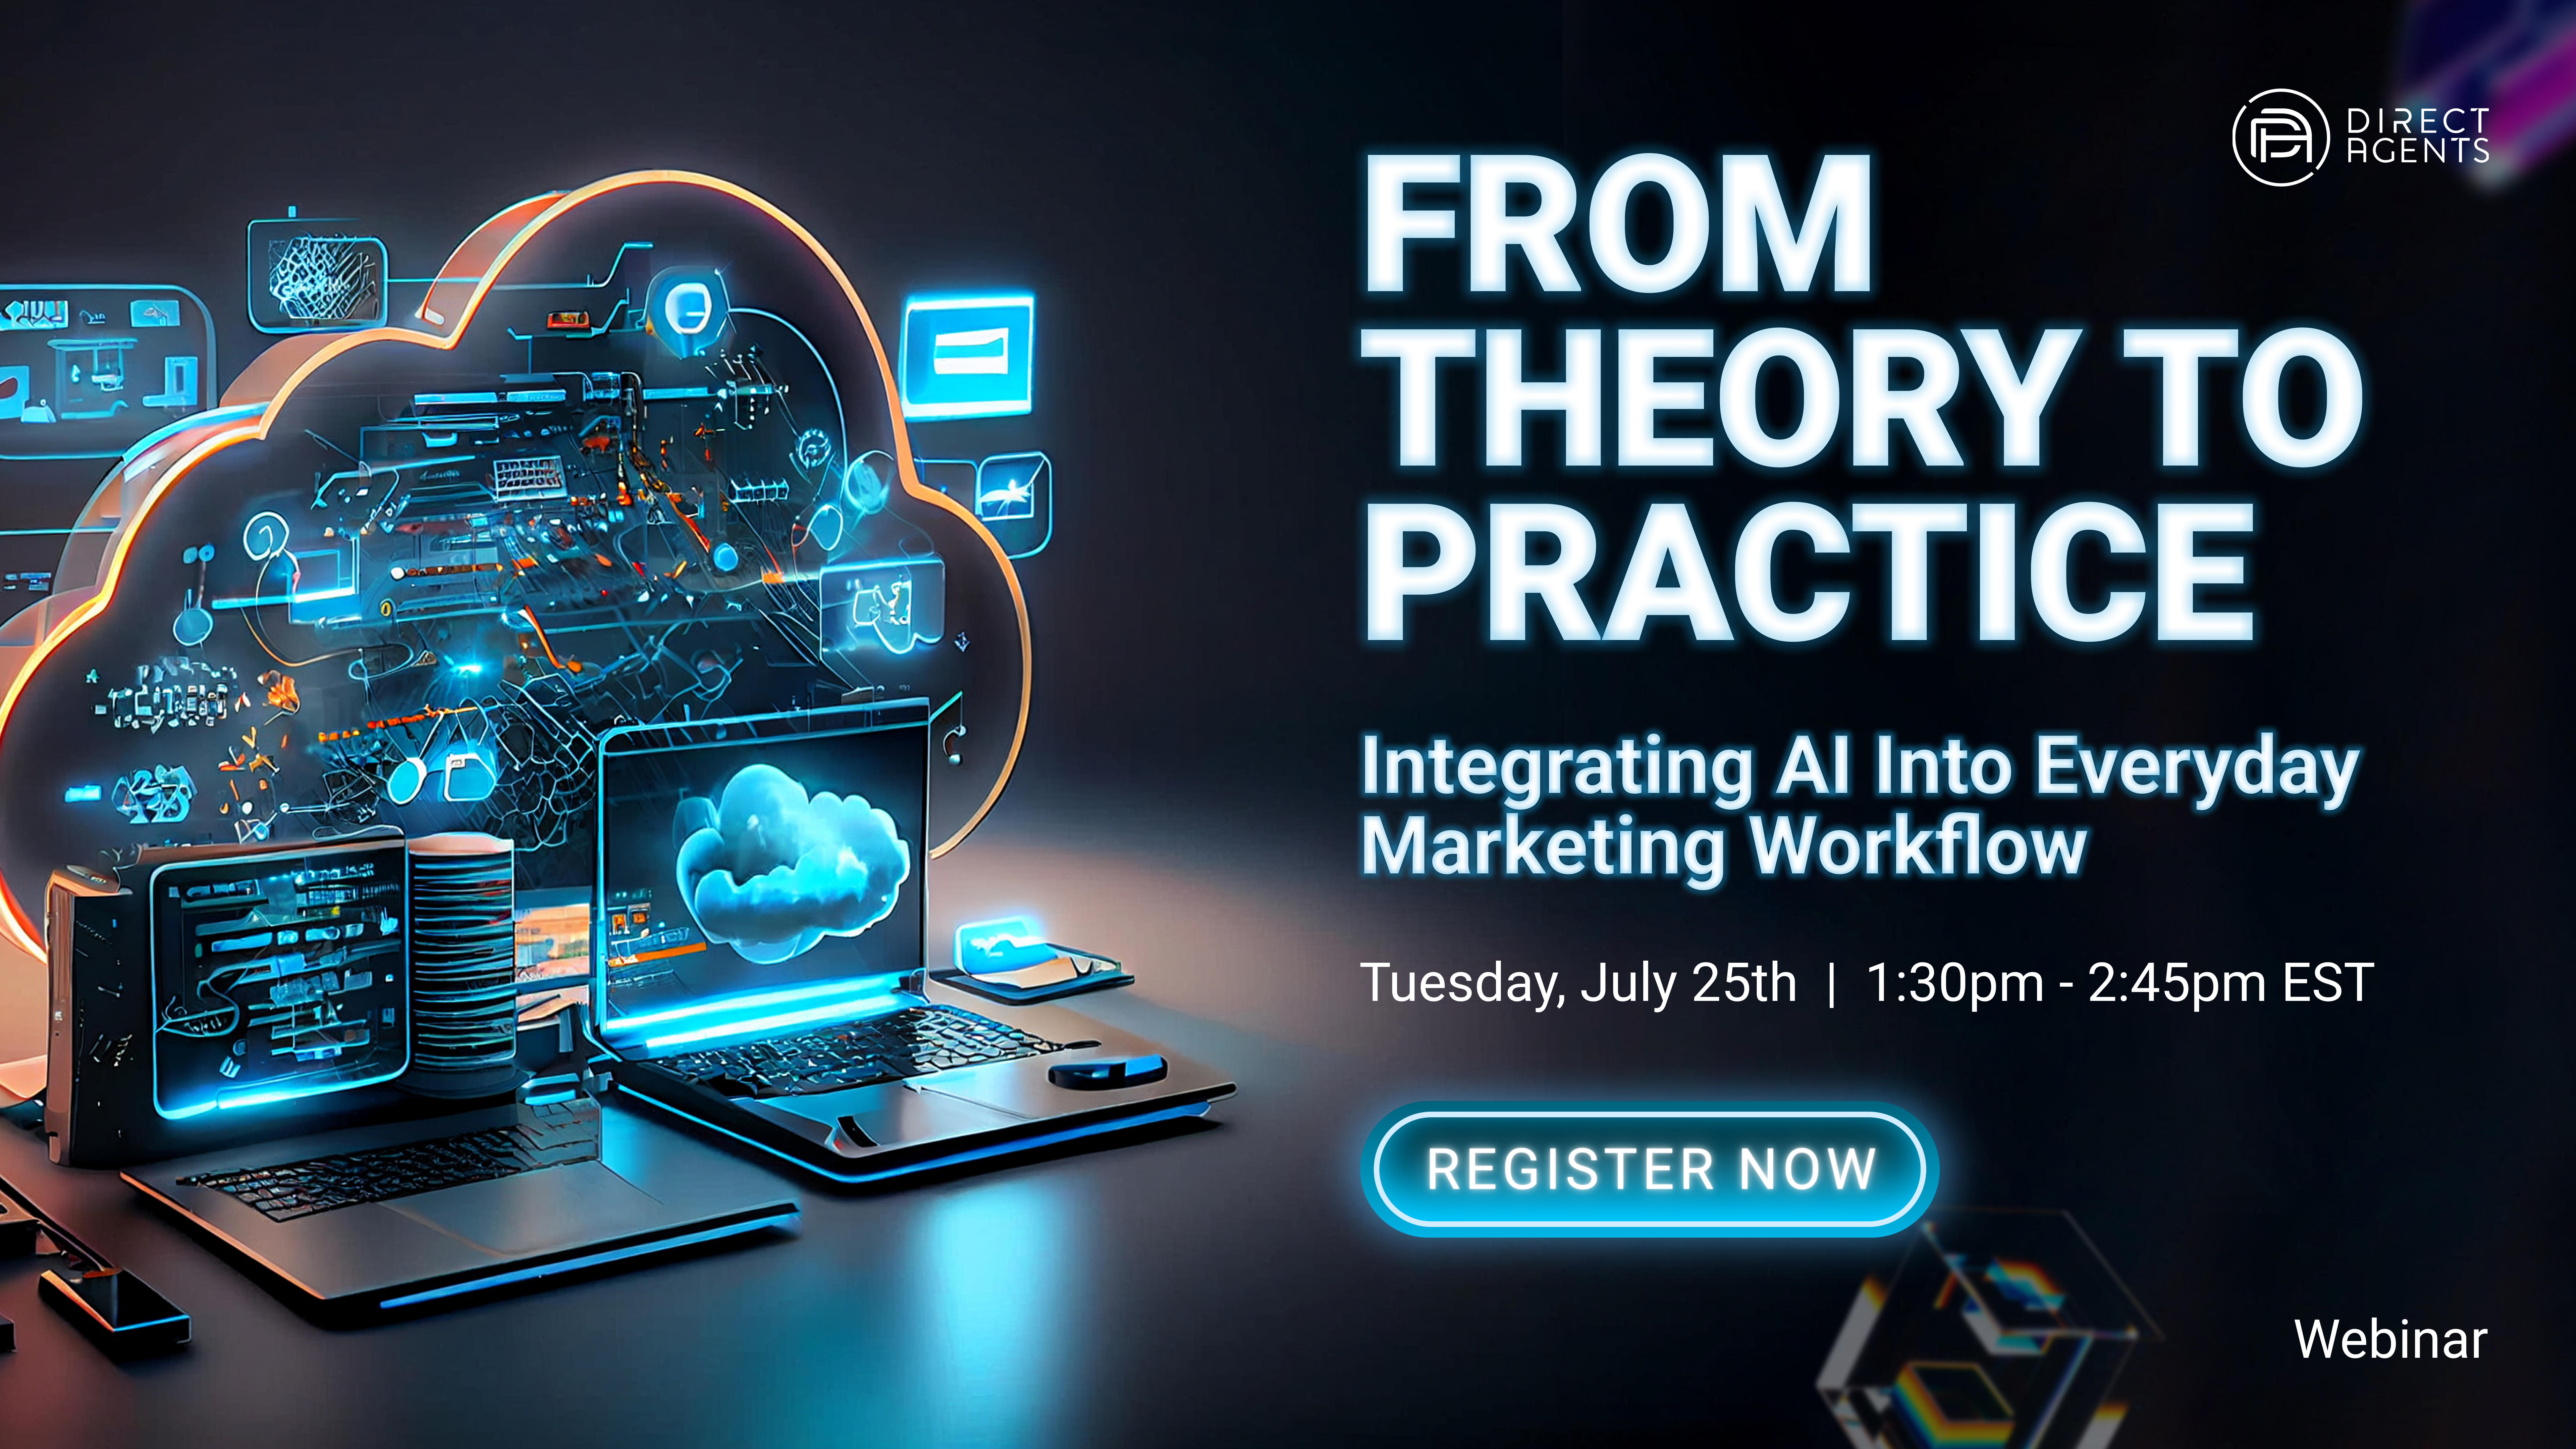 From Theory to Practice: Integrating AI into Everyday Marketing Workflow Webinar